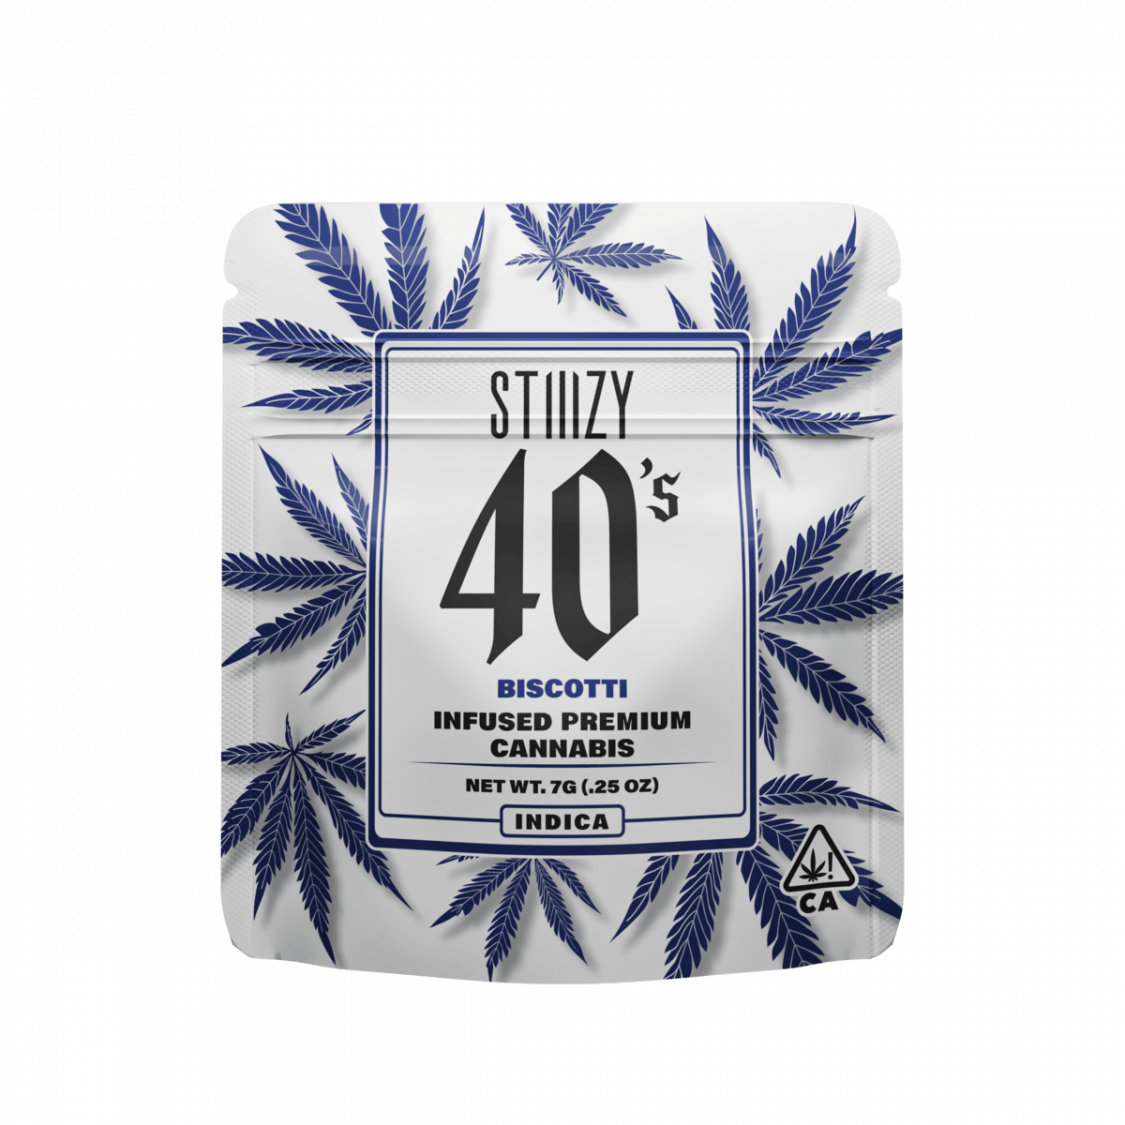 STIIIZY Biscotti 40s Infused Flower Flower Infused Flower